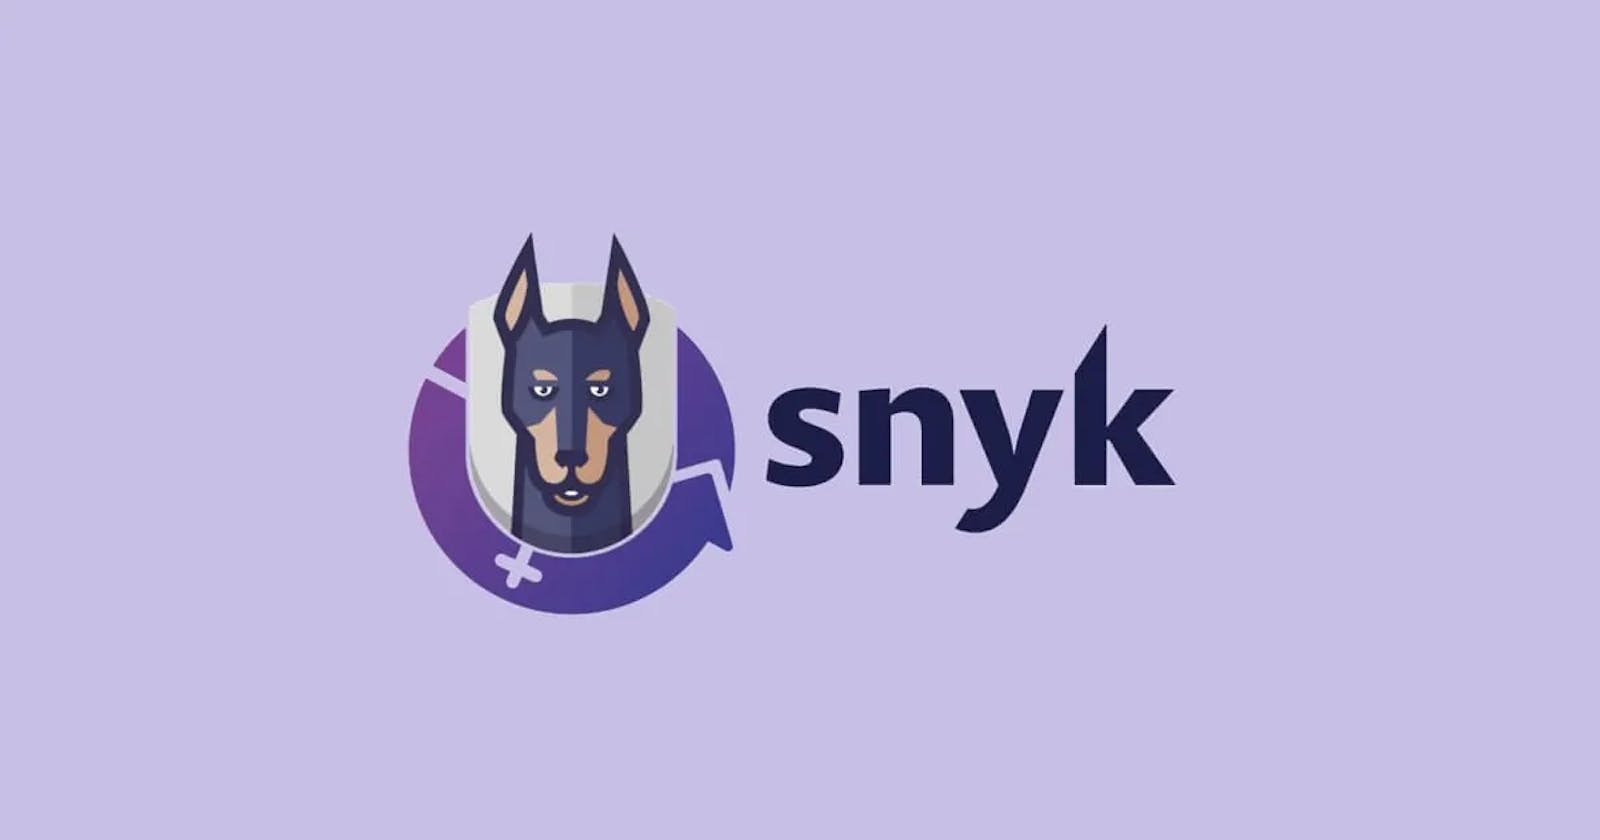 Snyk: Developer security at its best!